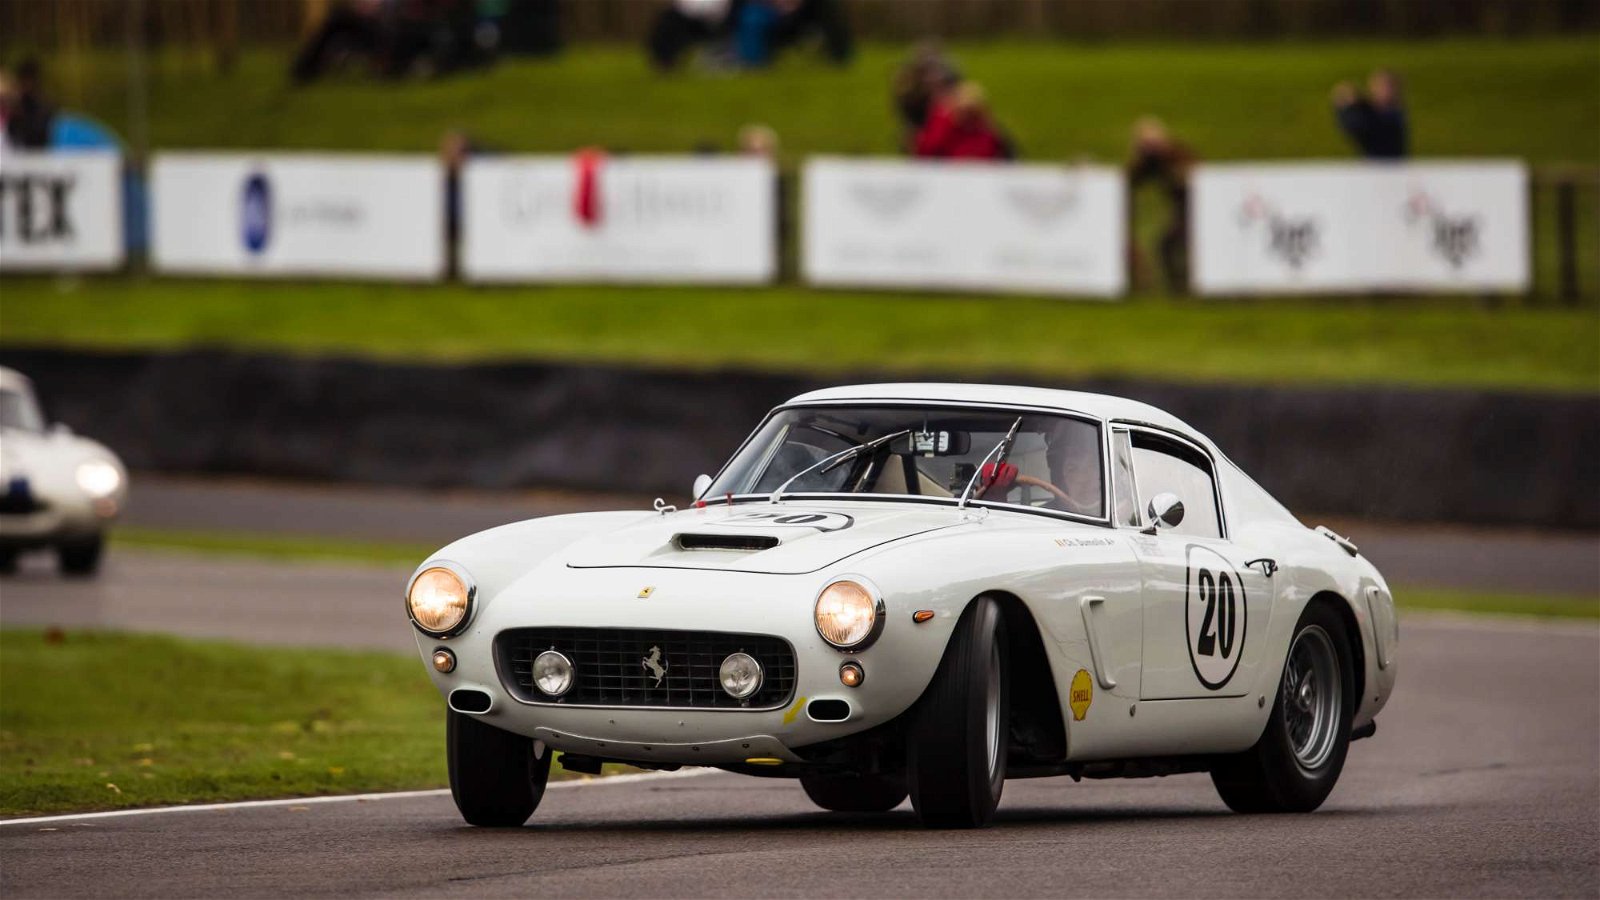 A Ferrari 250 GT SWB being driven on the absolute limit. Taken by Drew Gibson for Goodwood